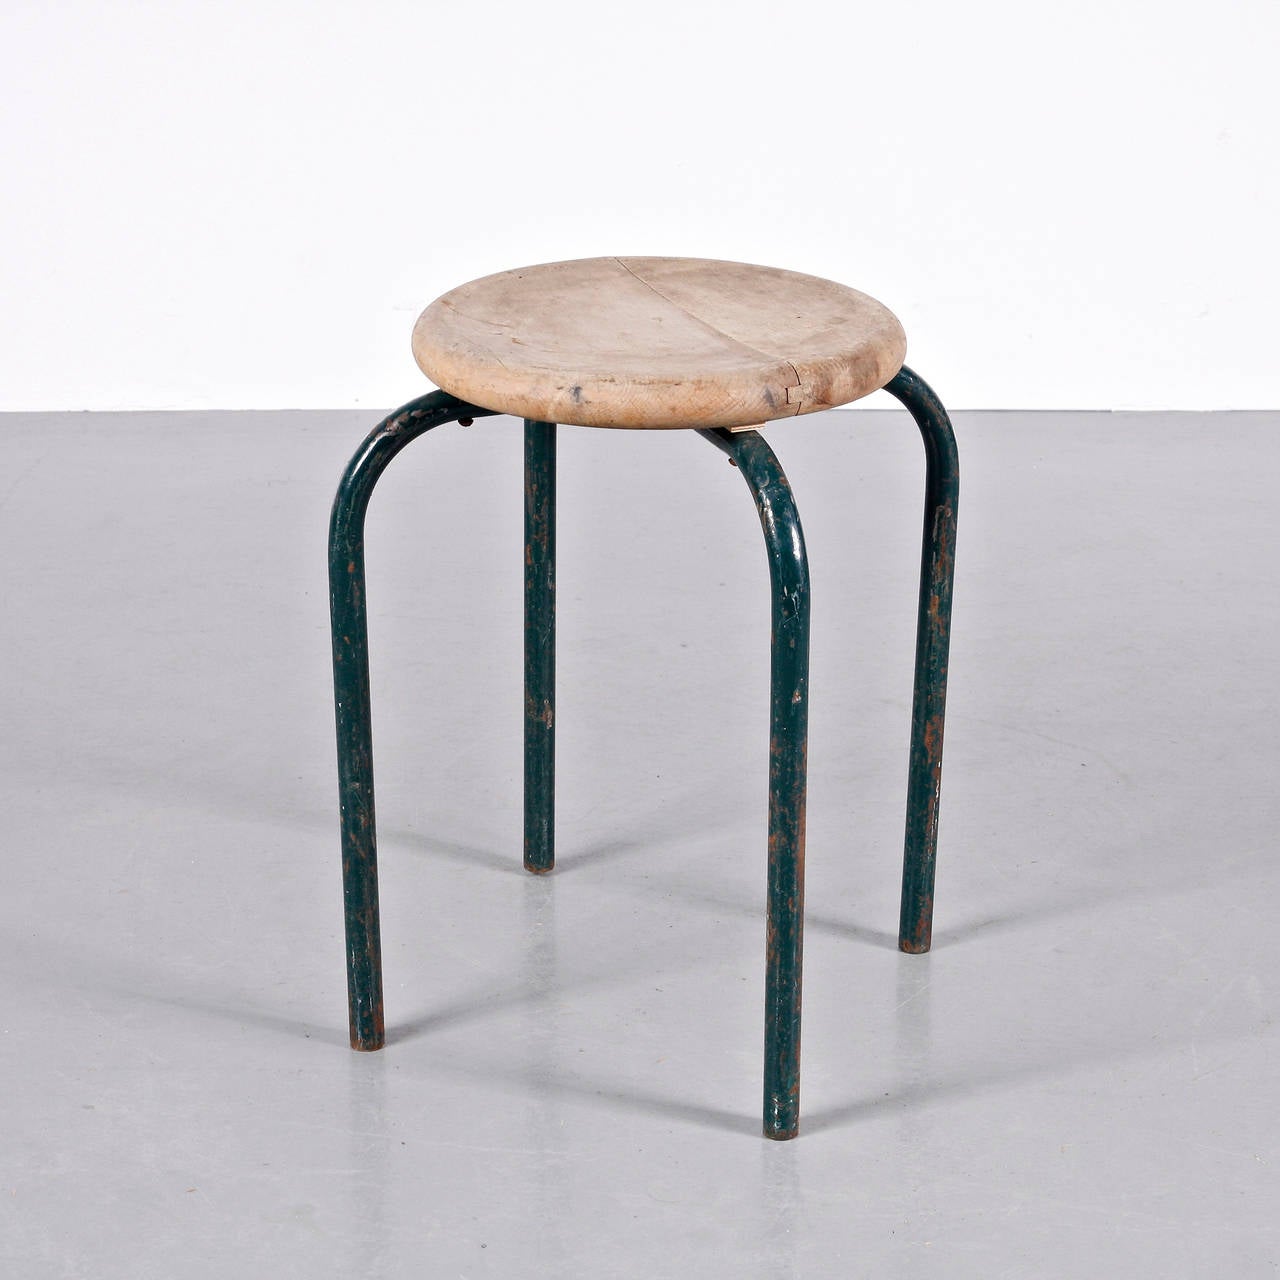 Stool designed in the manner of Jean Prouvé, circa 1950.
Manufactured in France.
Lacquered metal base and laminated wood seat.

In good original condition, with minor wear consistent with age and use, preserving a beautiful patina.